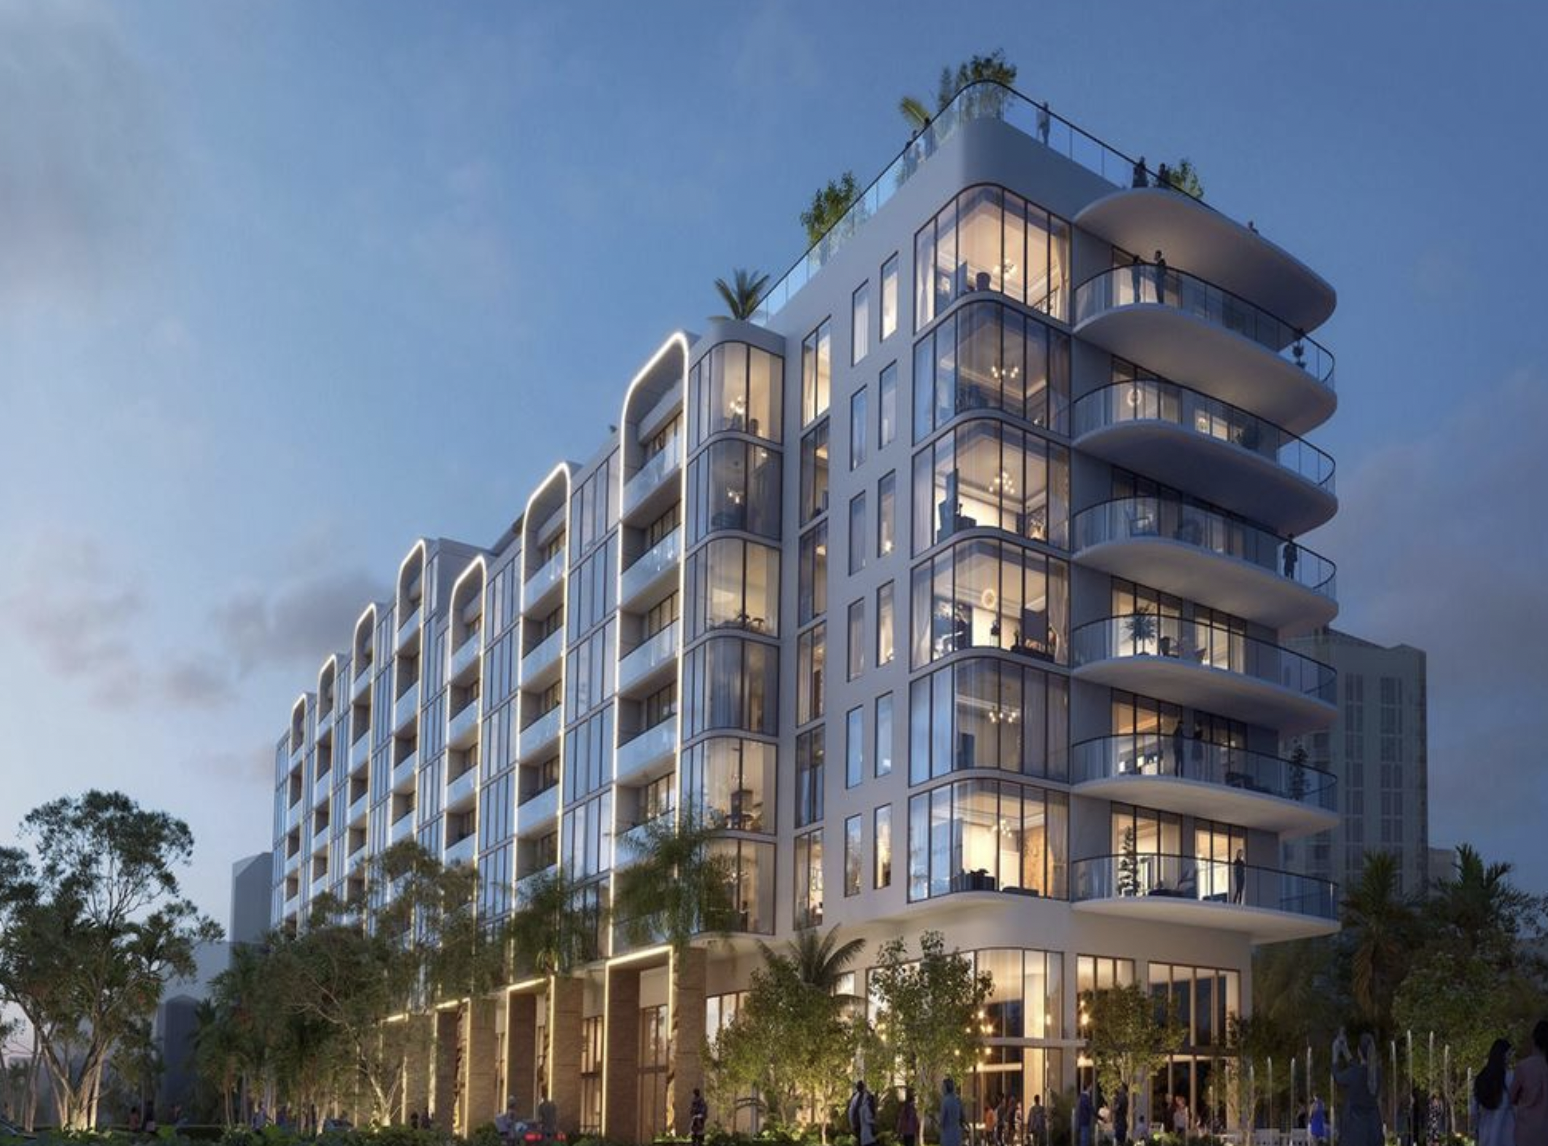 Kimco Realty plans apartments at Palms Town & Country Mall in Kendall Miami-Dade  County - South Florida Business Journal